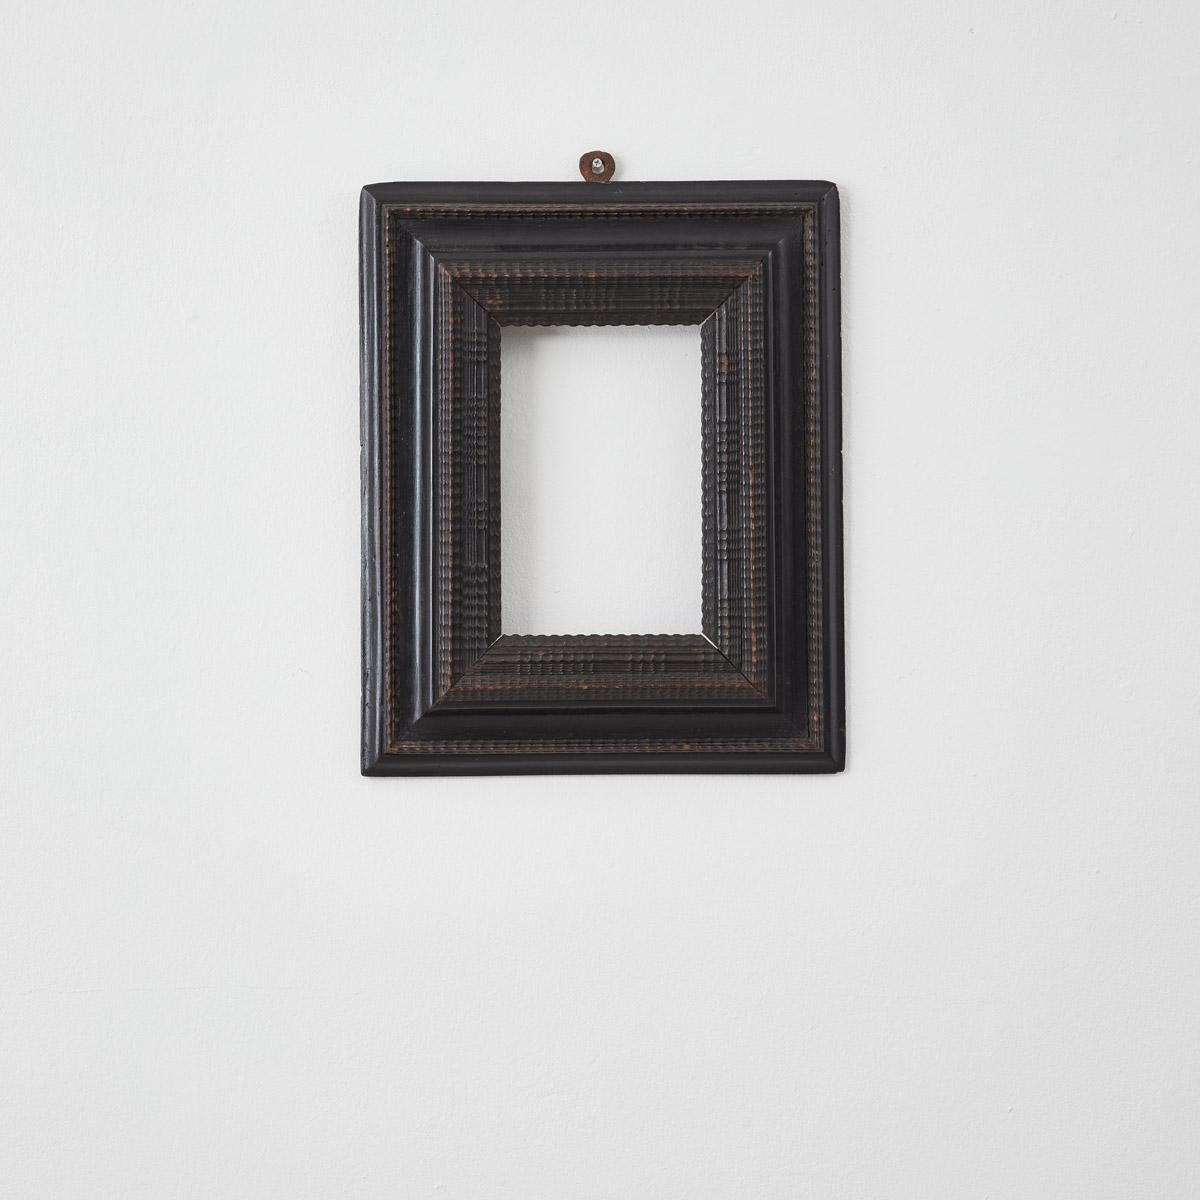 Made in Italy over two hundred years ago, this striking ebonised wooden ripple frame is made in the 17th Century Dutch ripple style. Its surface is intricately detailed and engraved with the carved ripple patterns.